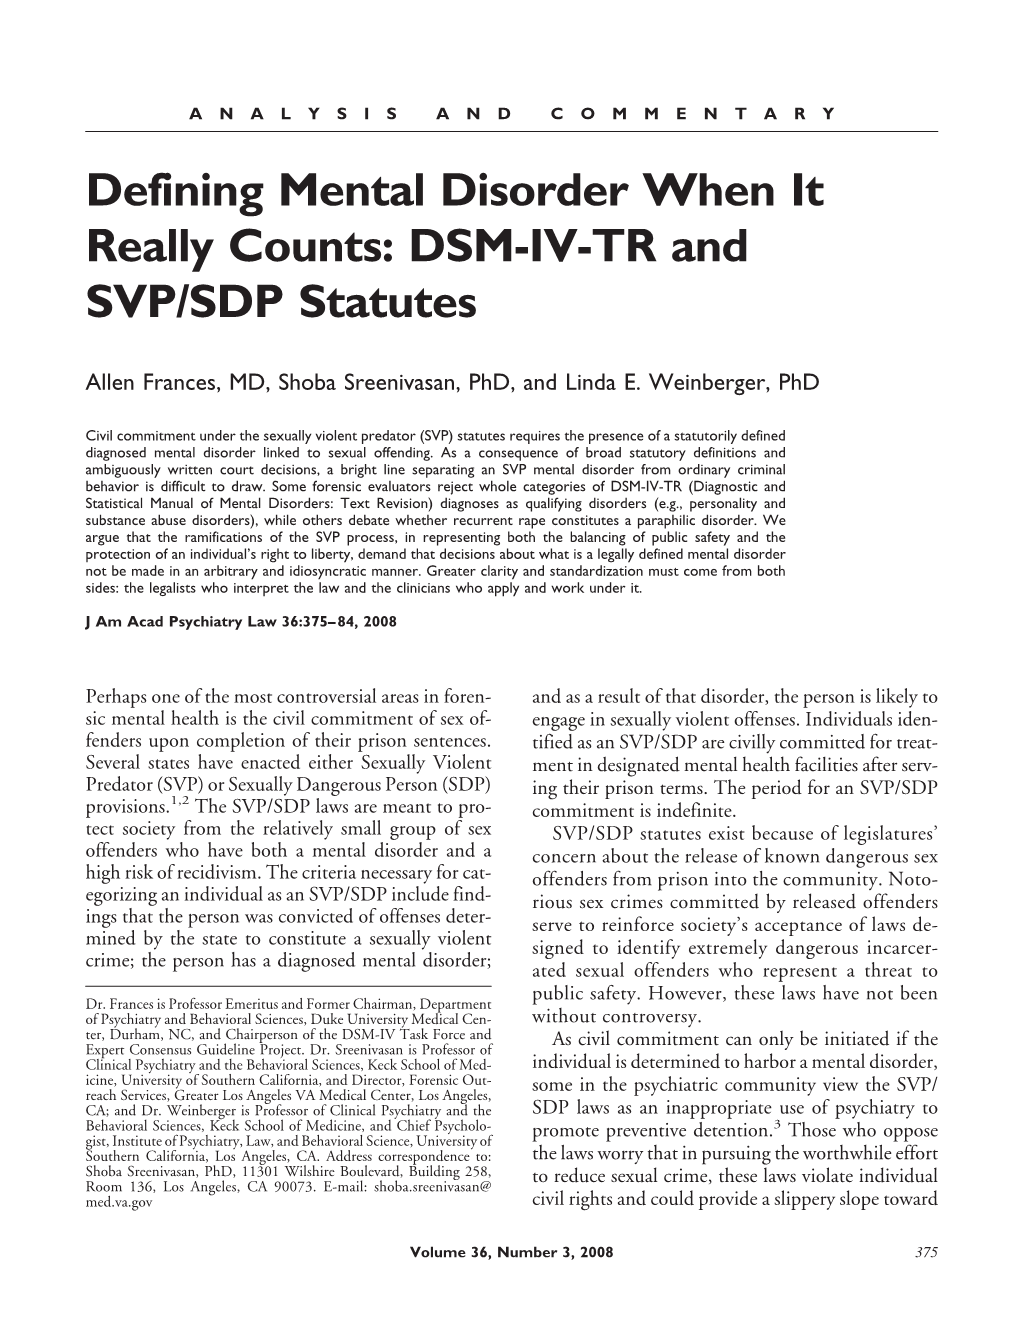 Defining Mental Disorder When It Really Counts: DSM-IV-TR and SVP/SDP Statutes